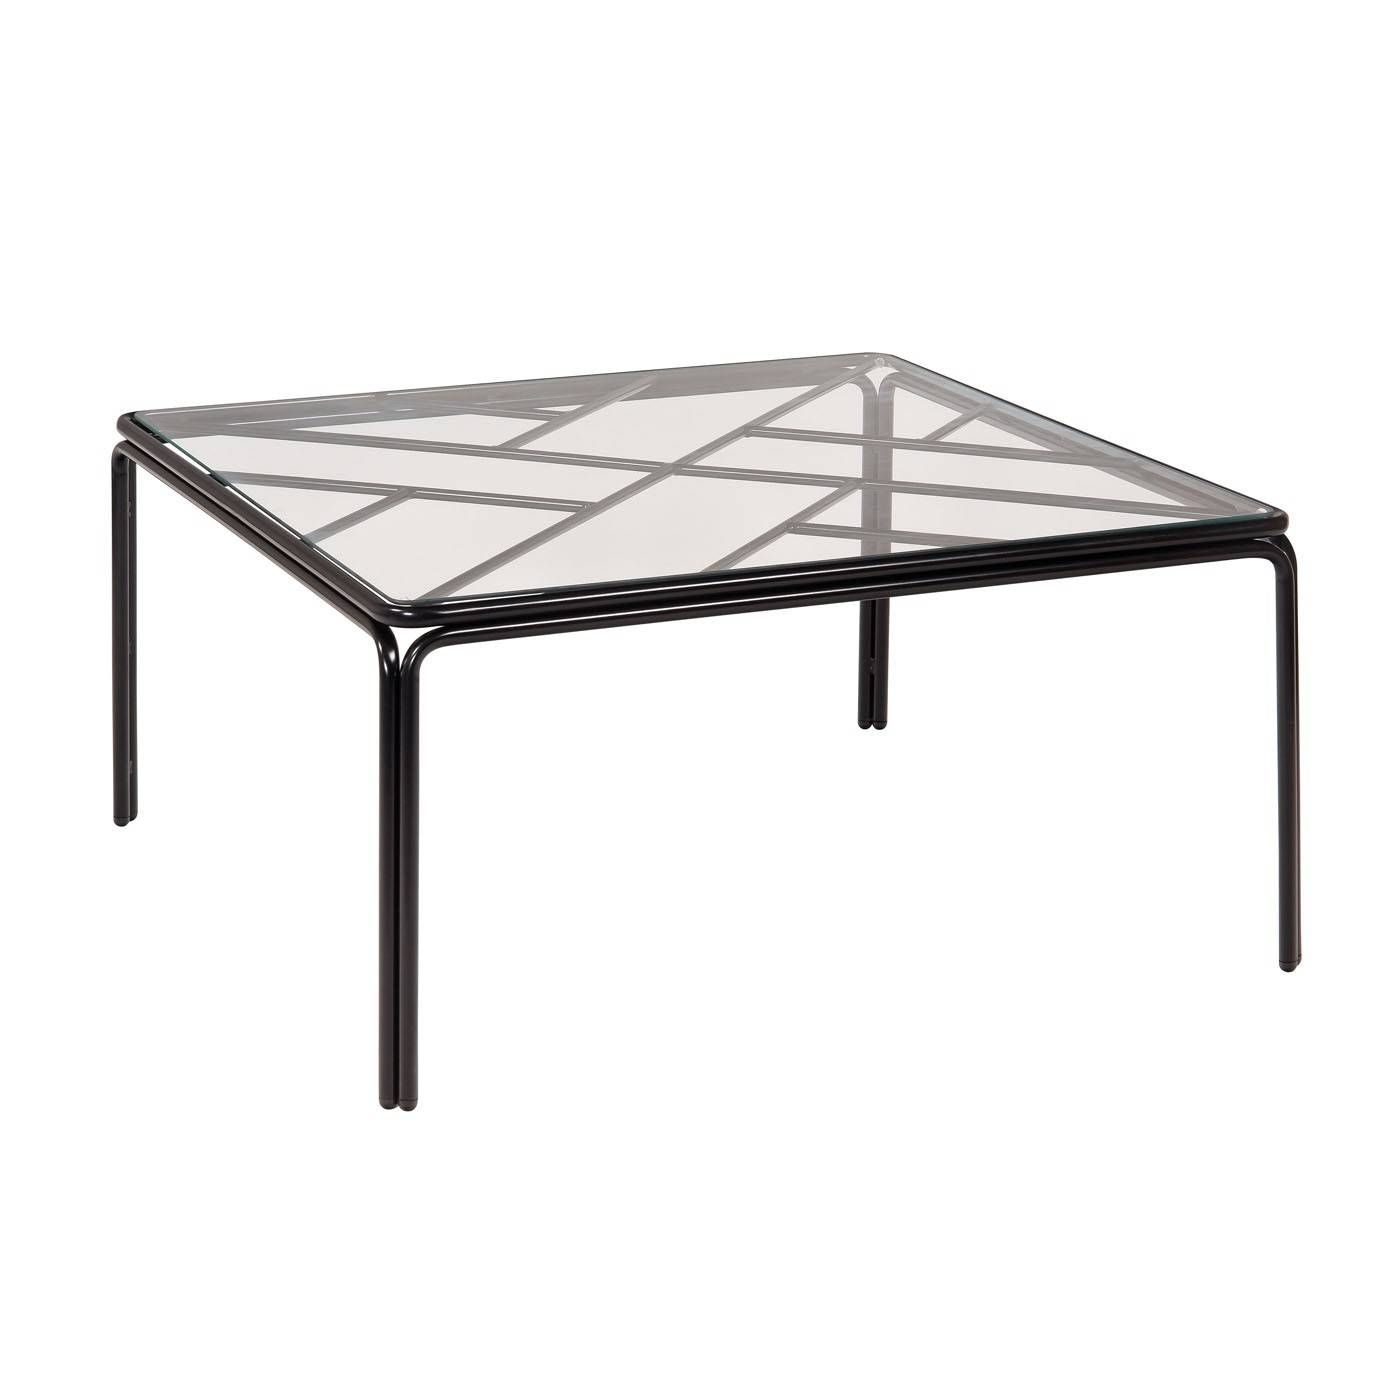 Fairy Tale Contemporary Square Patio Coffee Table :: Stori Modern Throughout Square Coffee Table Modern (View 10 of 15)